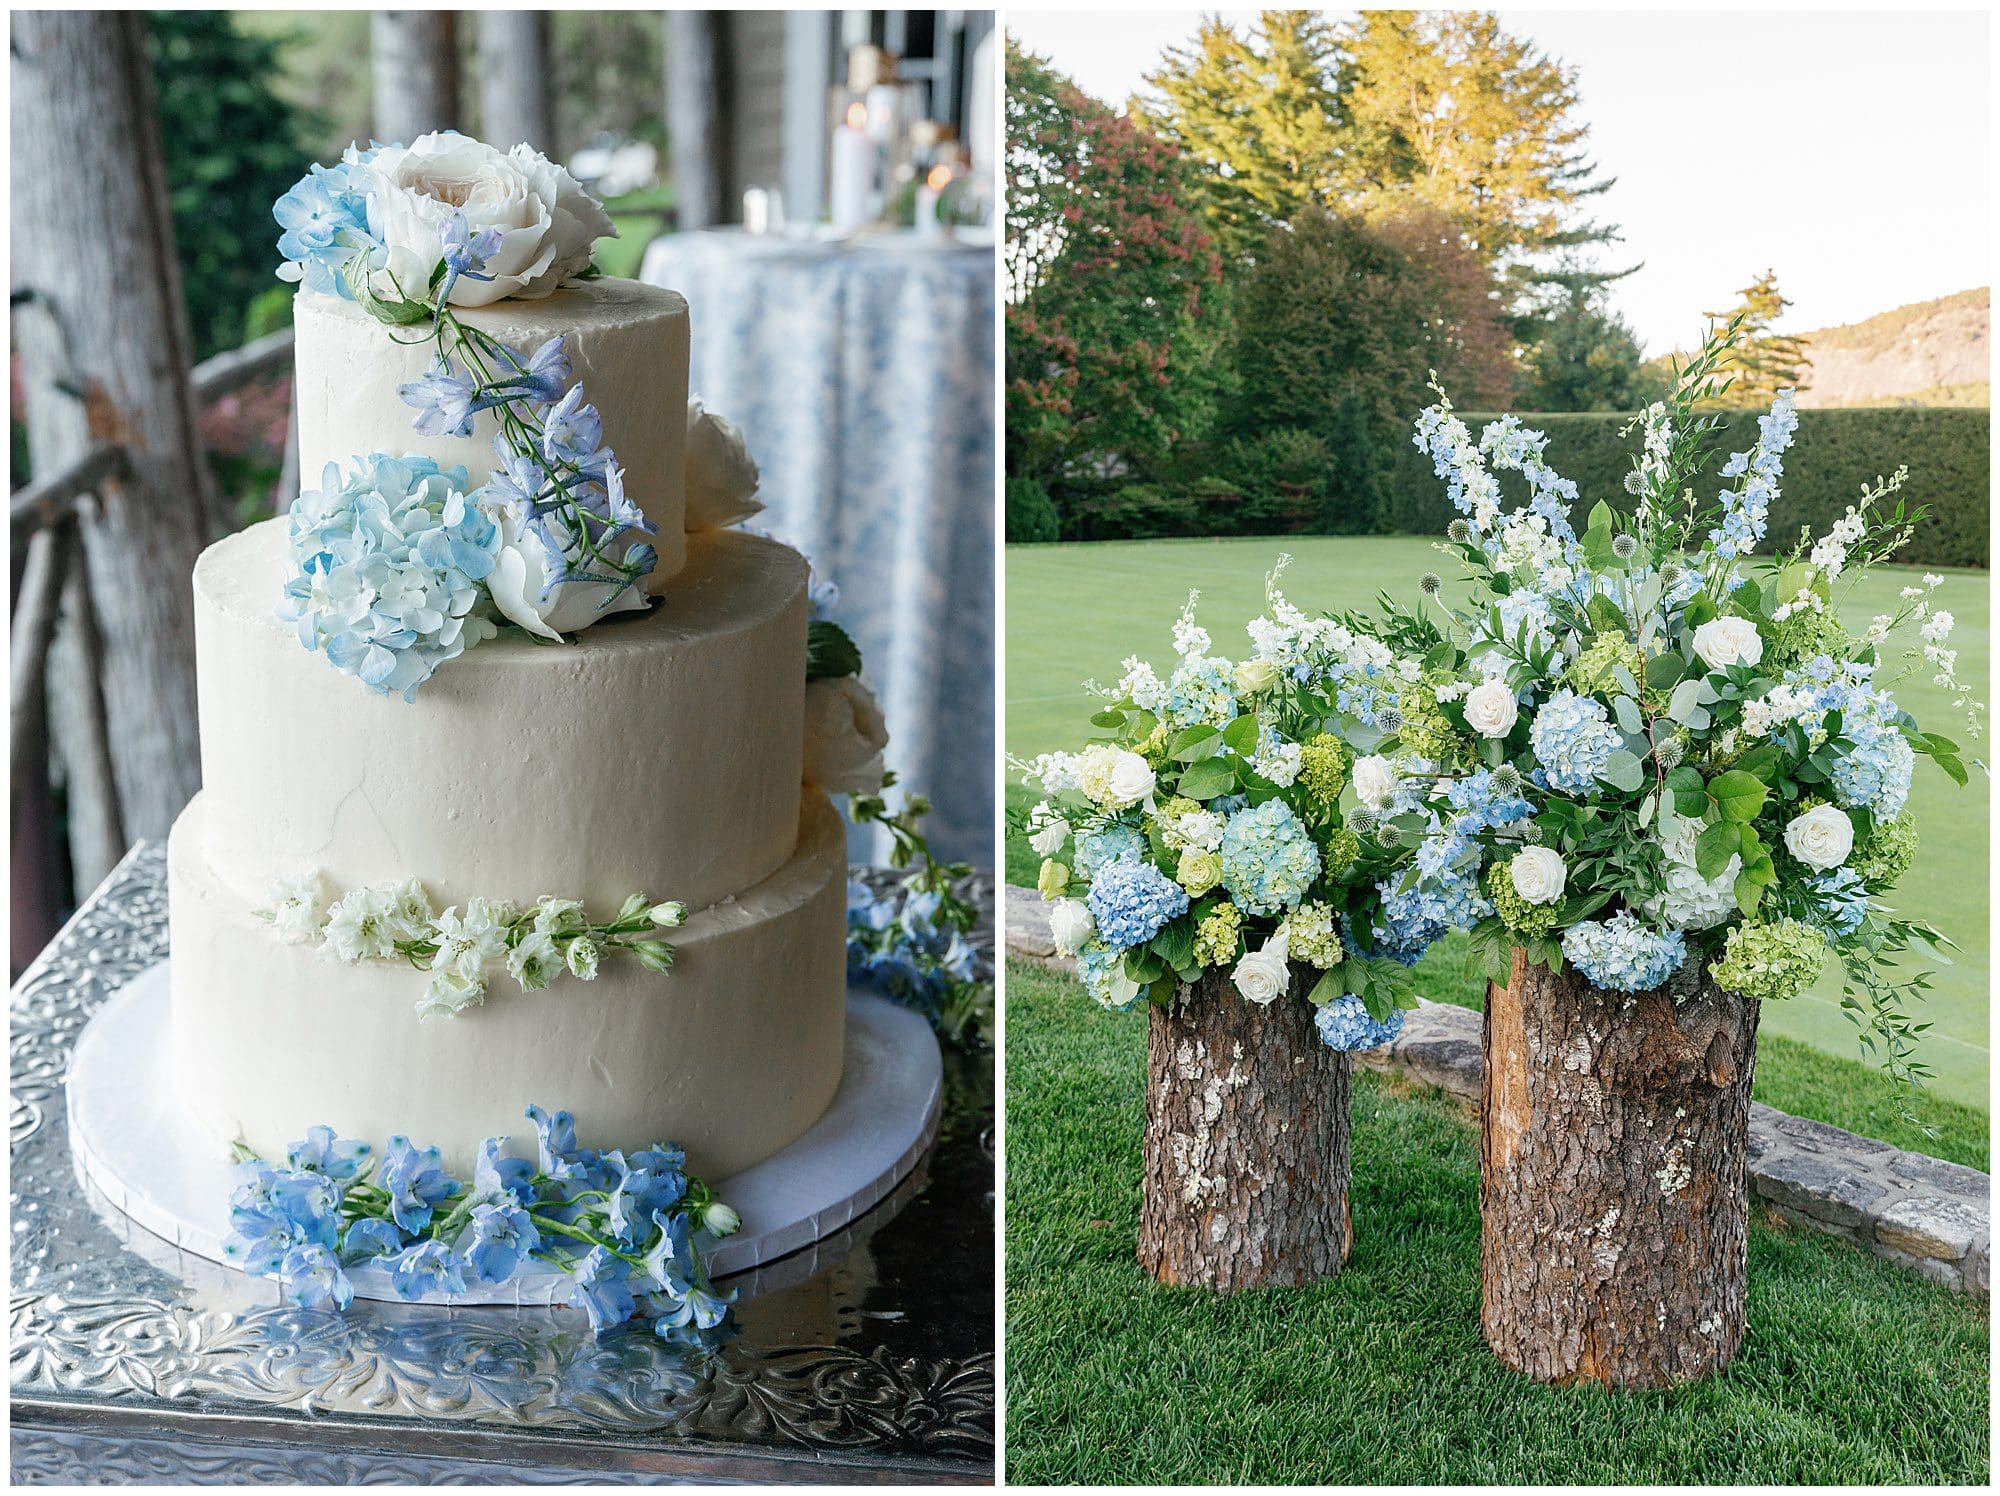 A wedding cake decorated with blue flowers and hydrangeas.